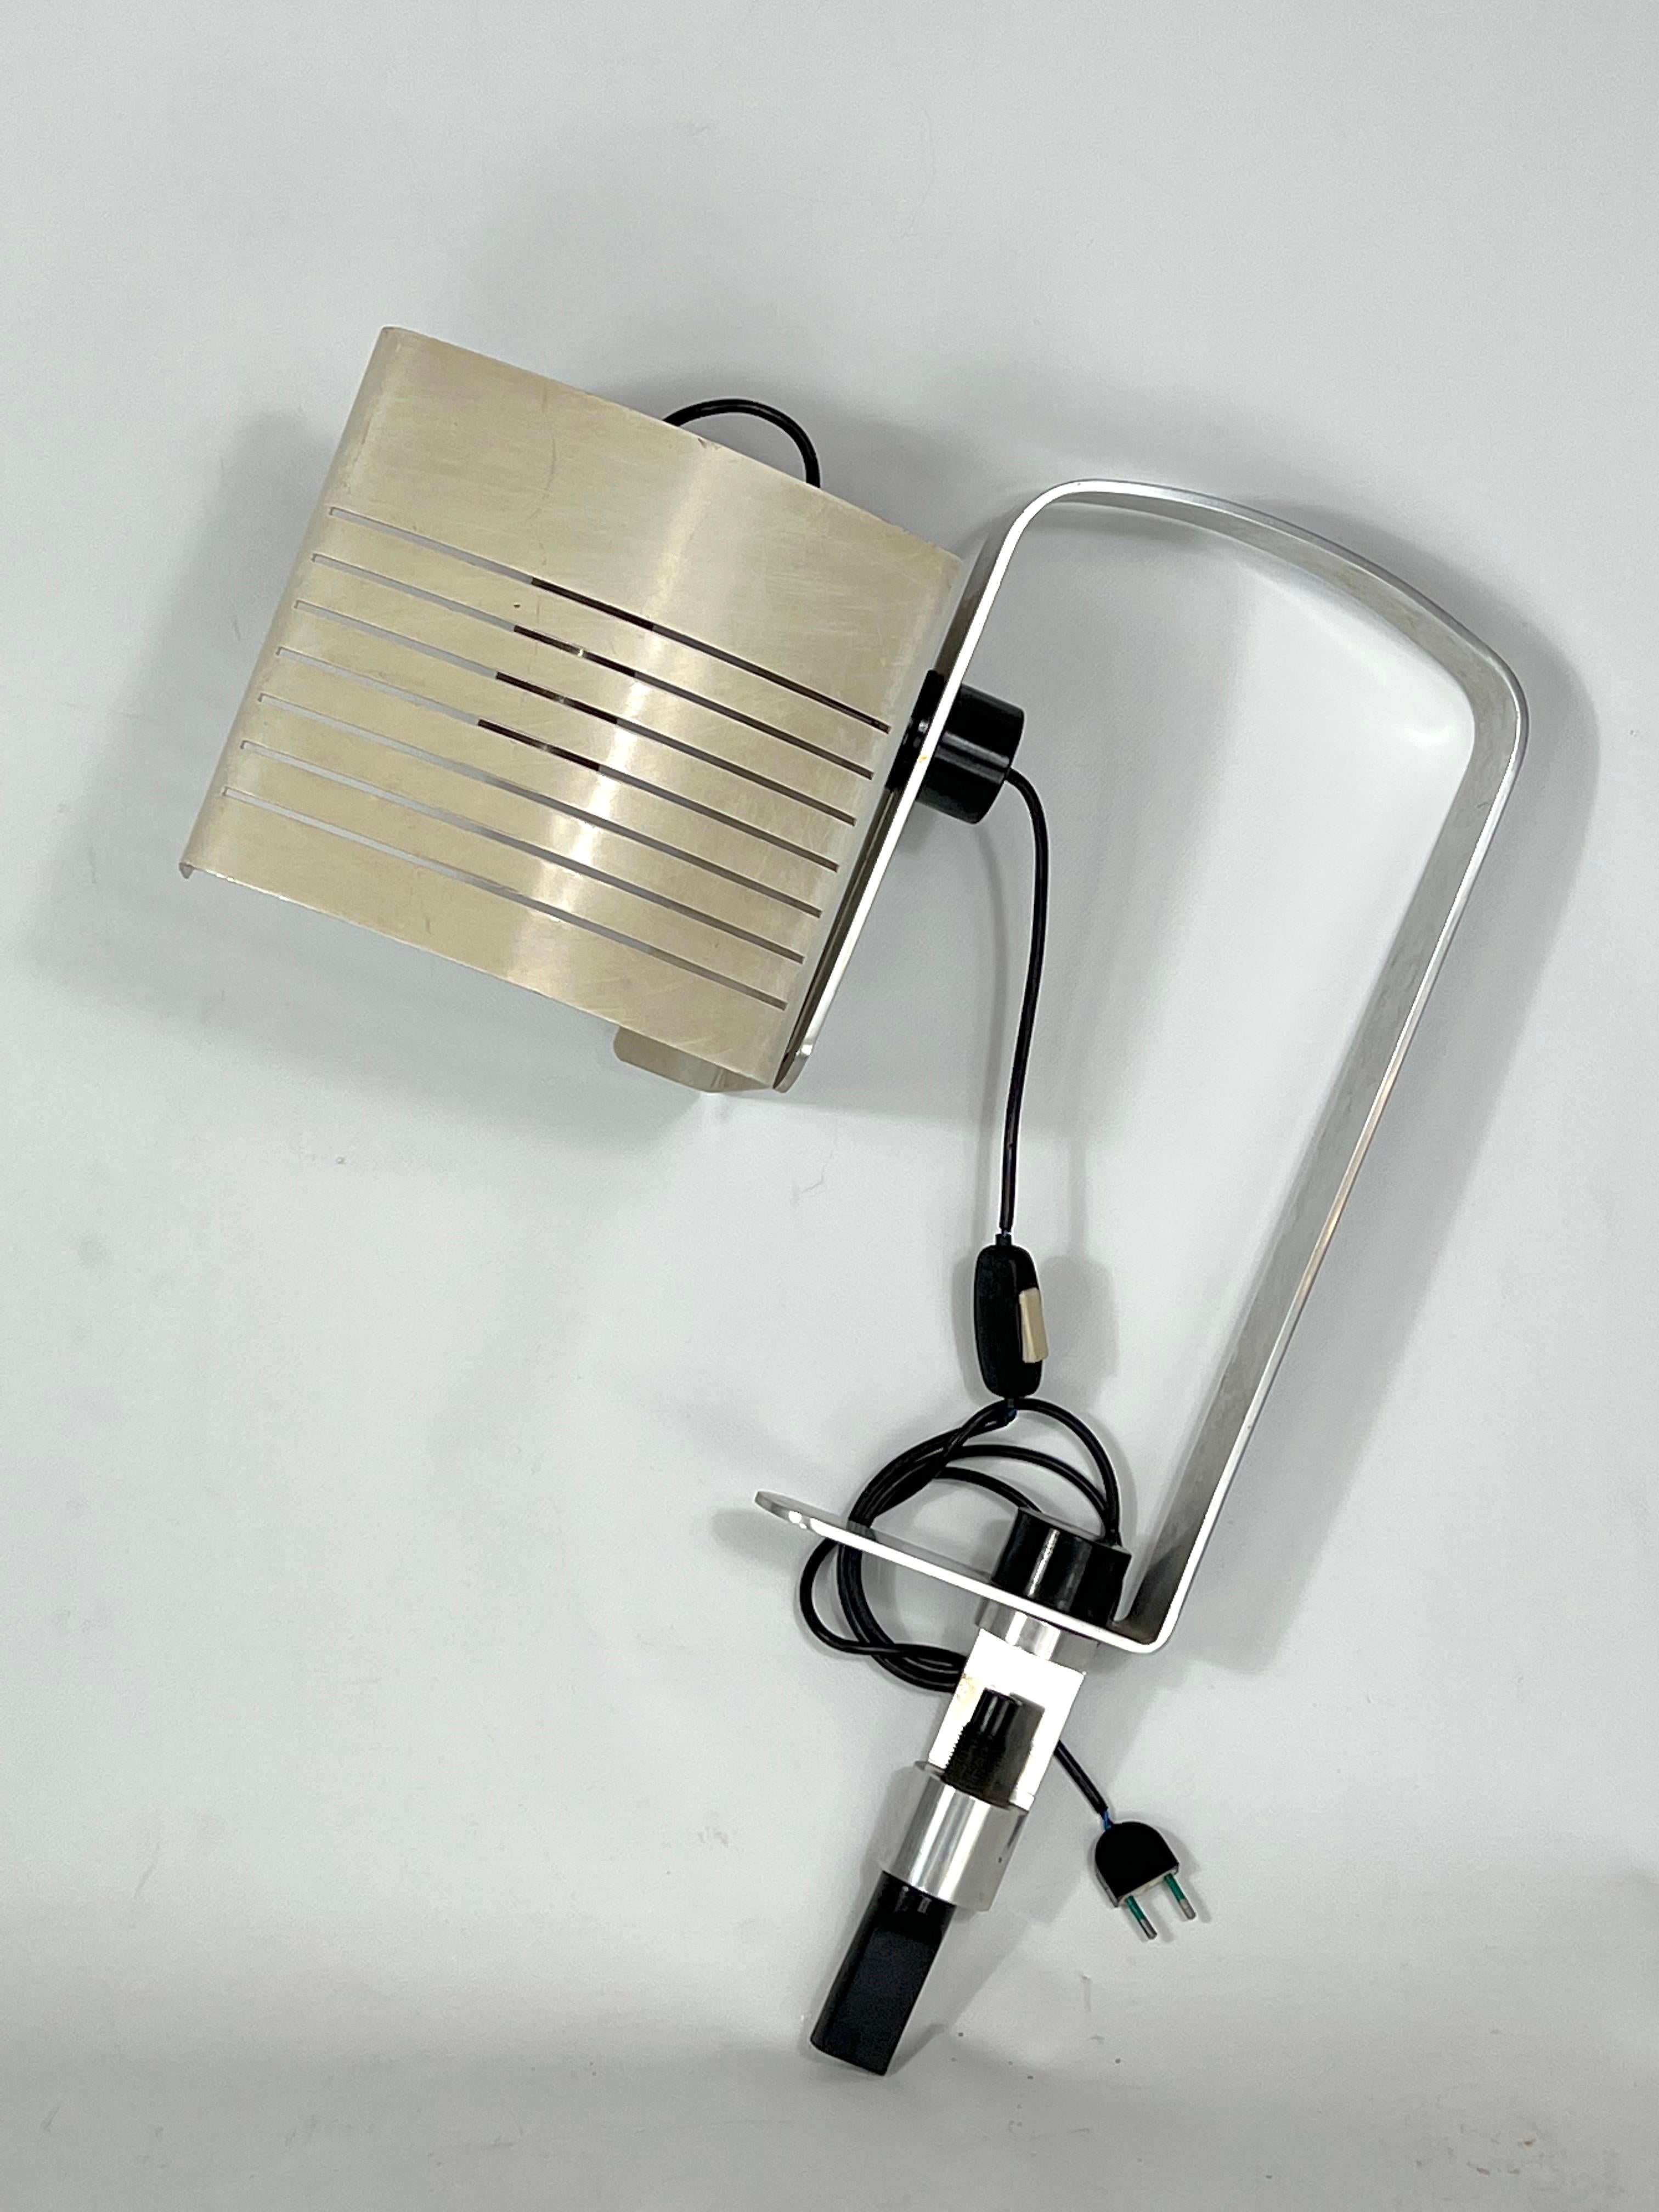 Reminiscent of Joe Colombo style for Oluce, this desk lamp is made from aluminum, plastic and lacquer and it is in original vintage condition with trace of age and use. Full working with EU standard, adaptable on demand for USA standard.